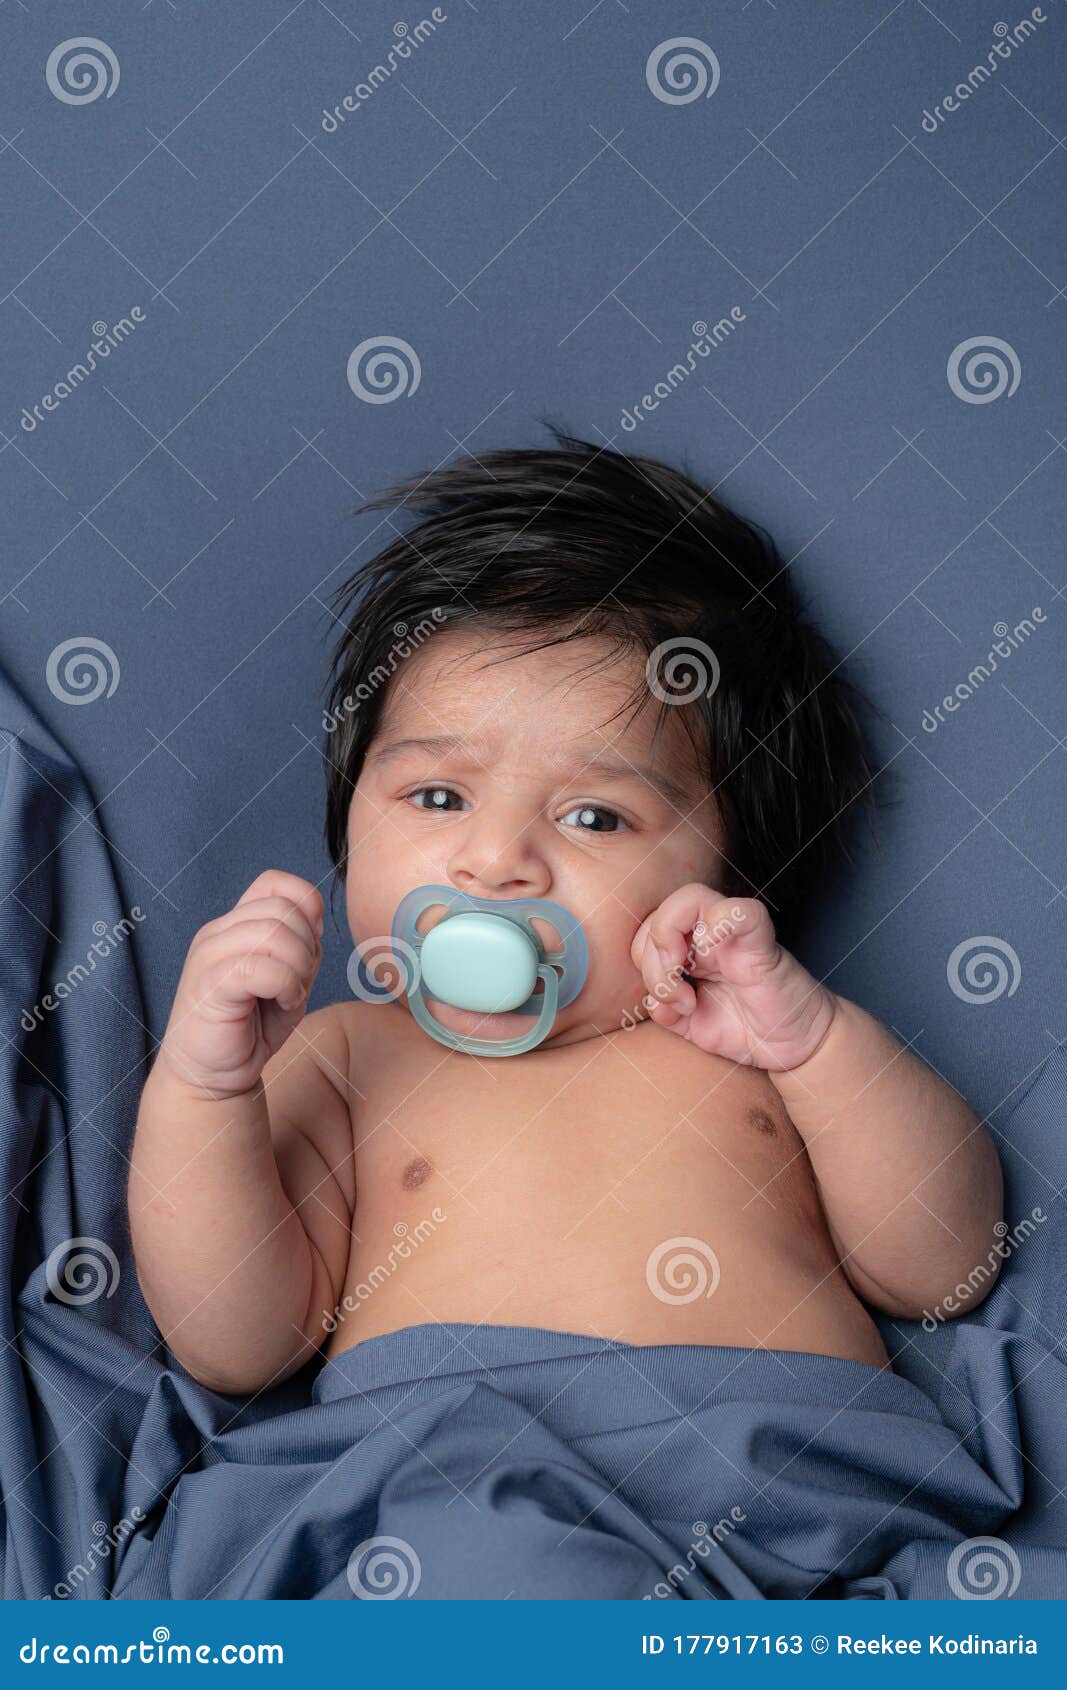 Cute Baby with a Nipple Looking at Camera Stock Image - Image of ...